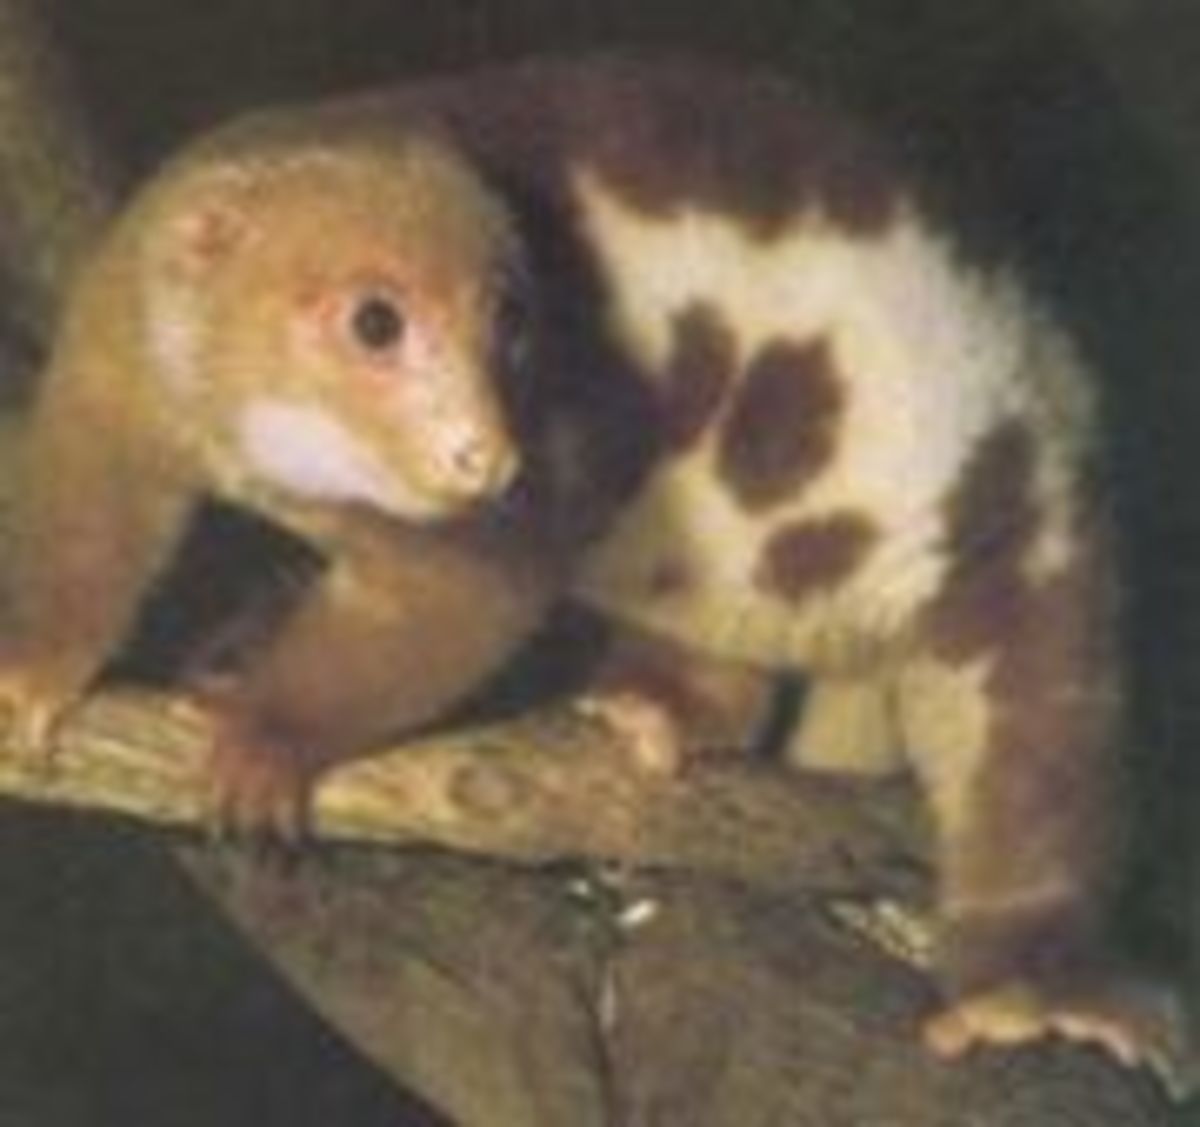 The Spotted Cuscus